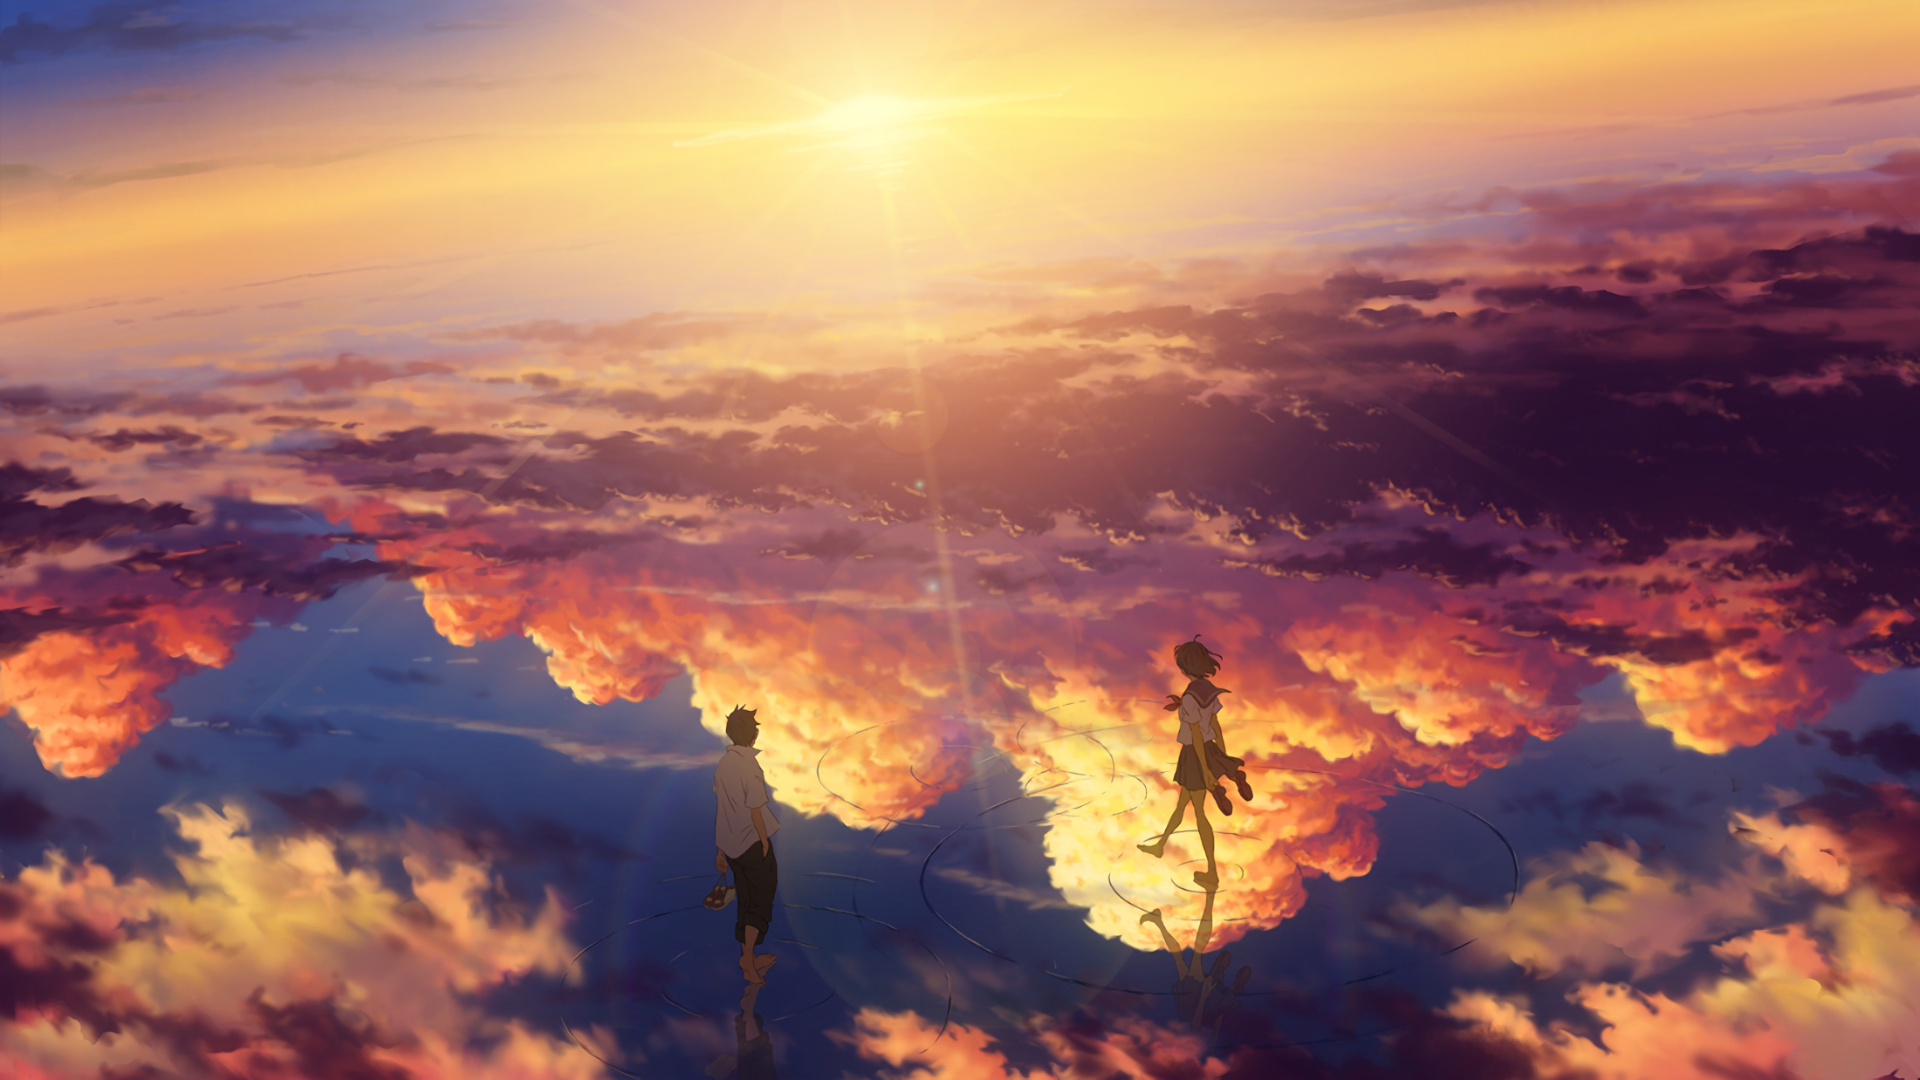 anime-landscape-beyond-the-clouds-sunset-anime-girl-and-boy-anime-2500.png